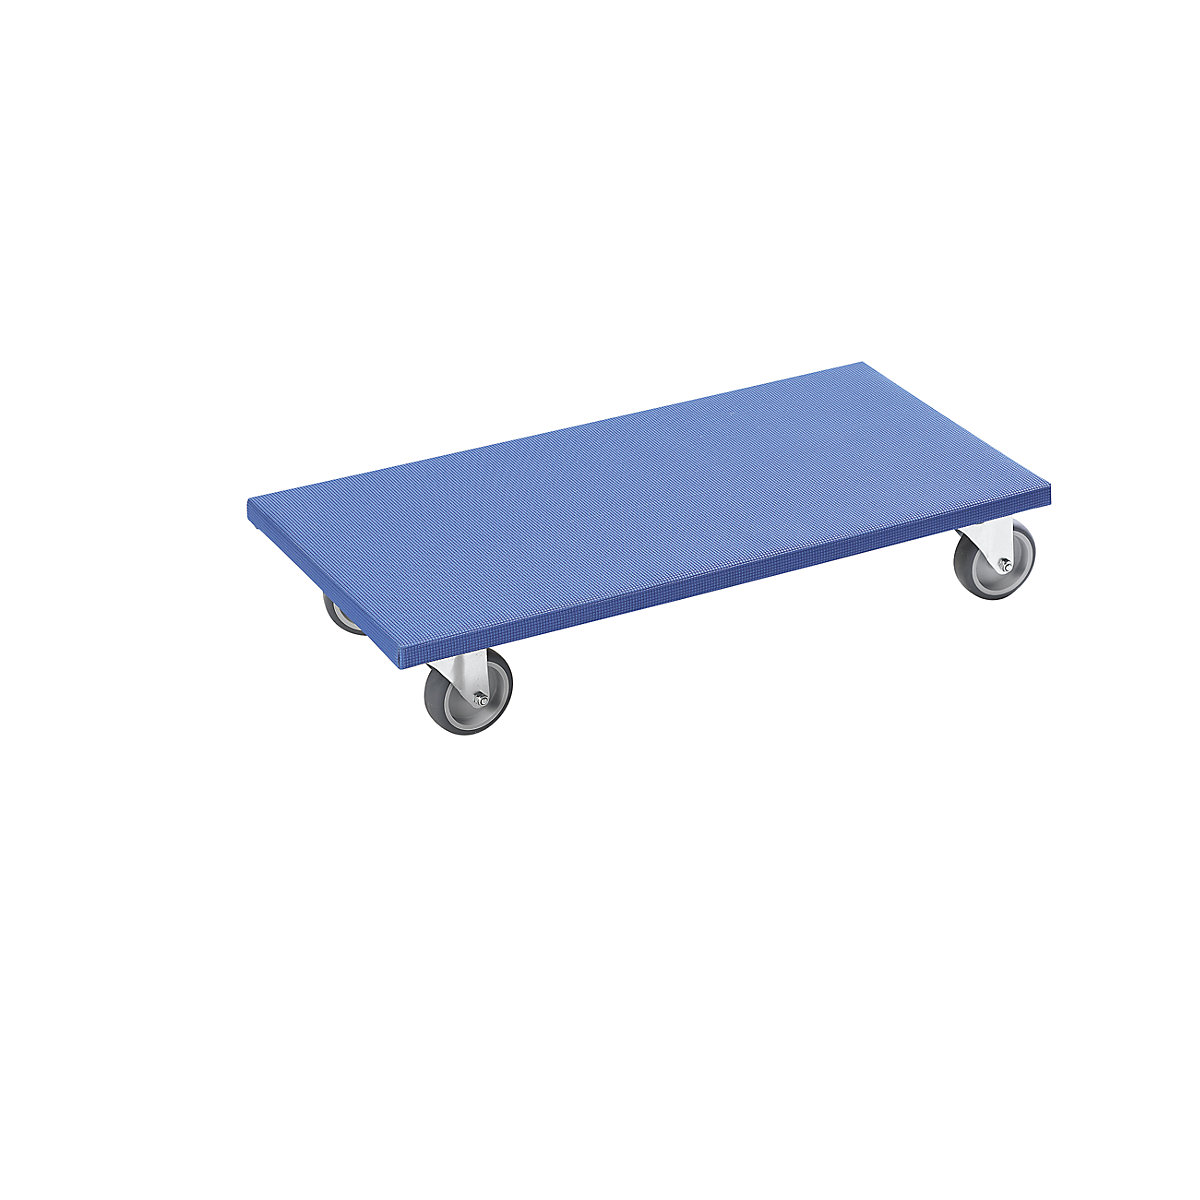 Furniture dolly, LxWxH 600 x 300 x 120 mm, pack of 2, 2+ packs-1